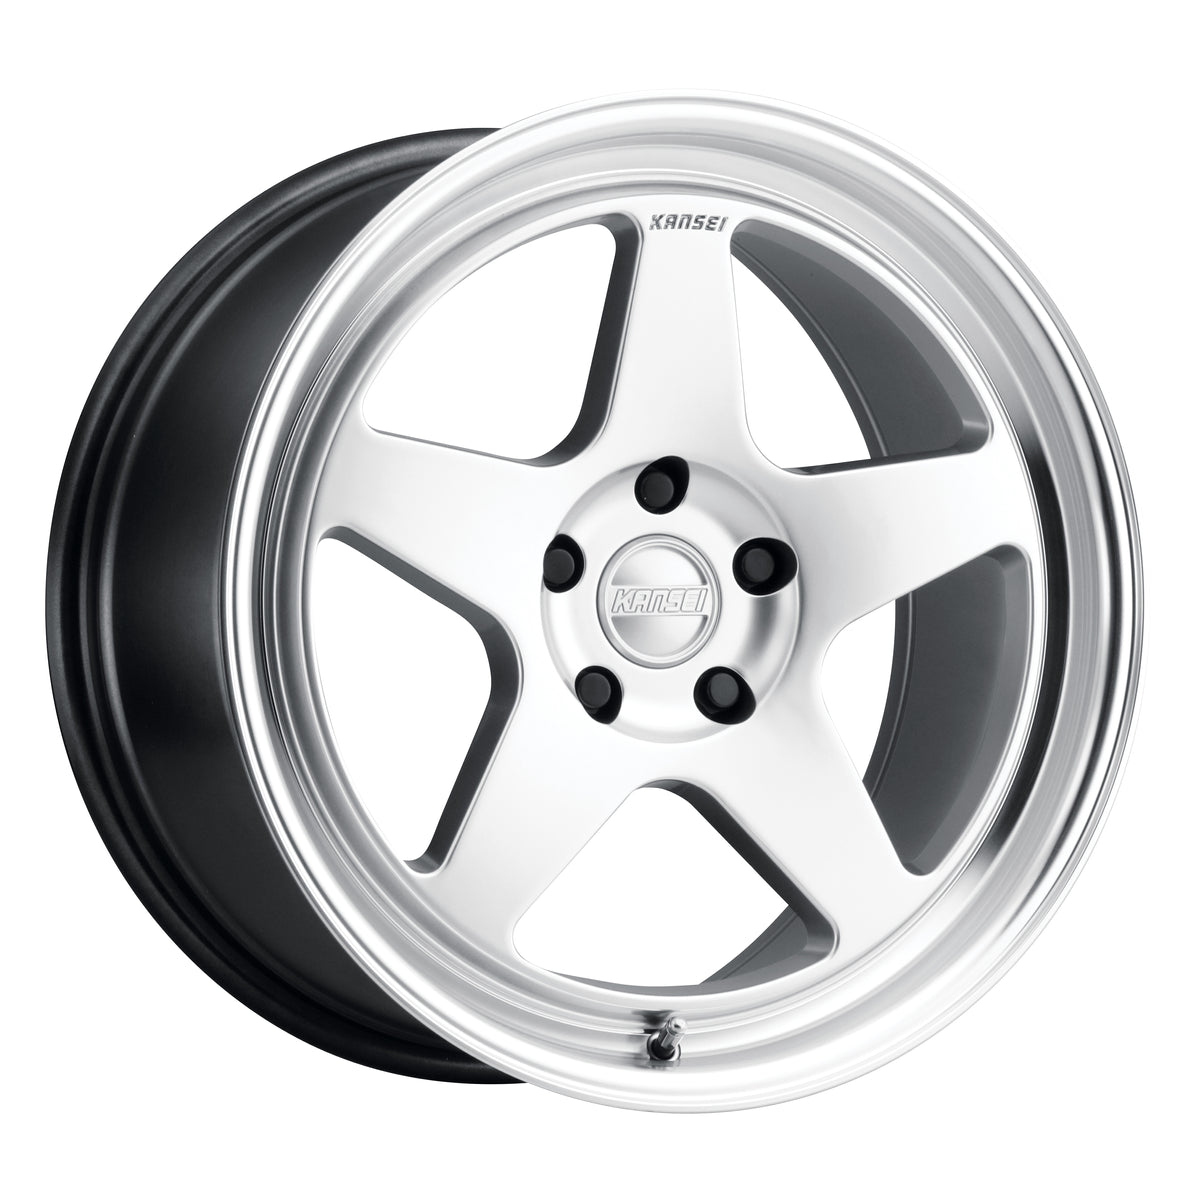 KNP HSBL 18X10.5 5X114.3 +12